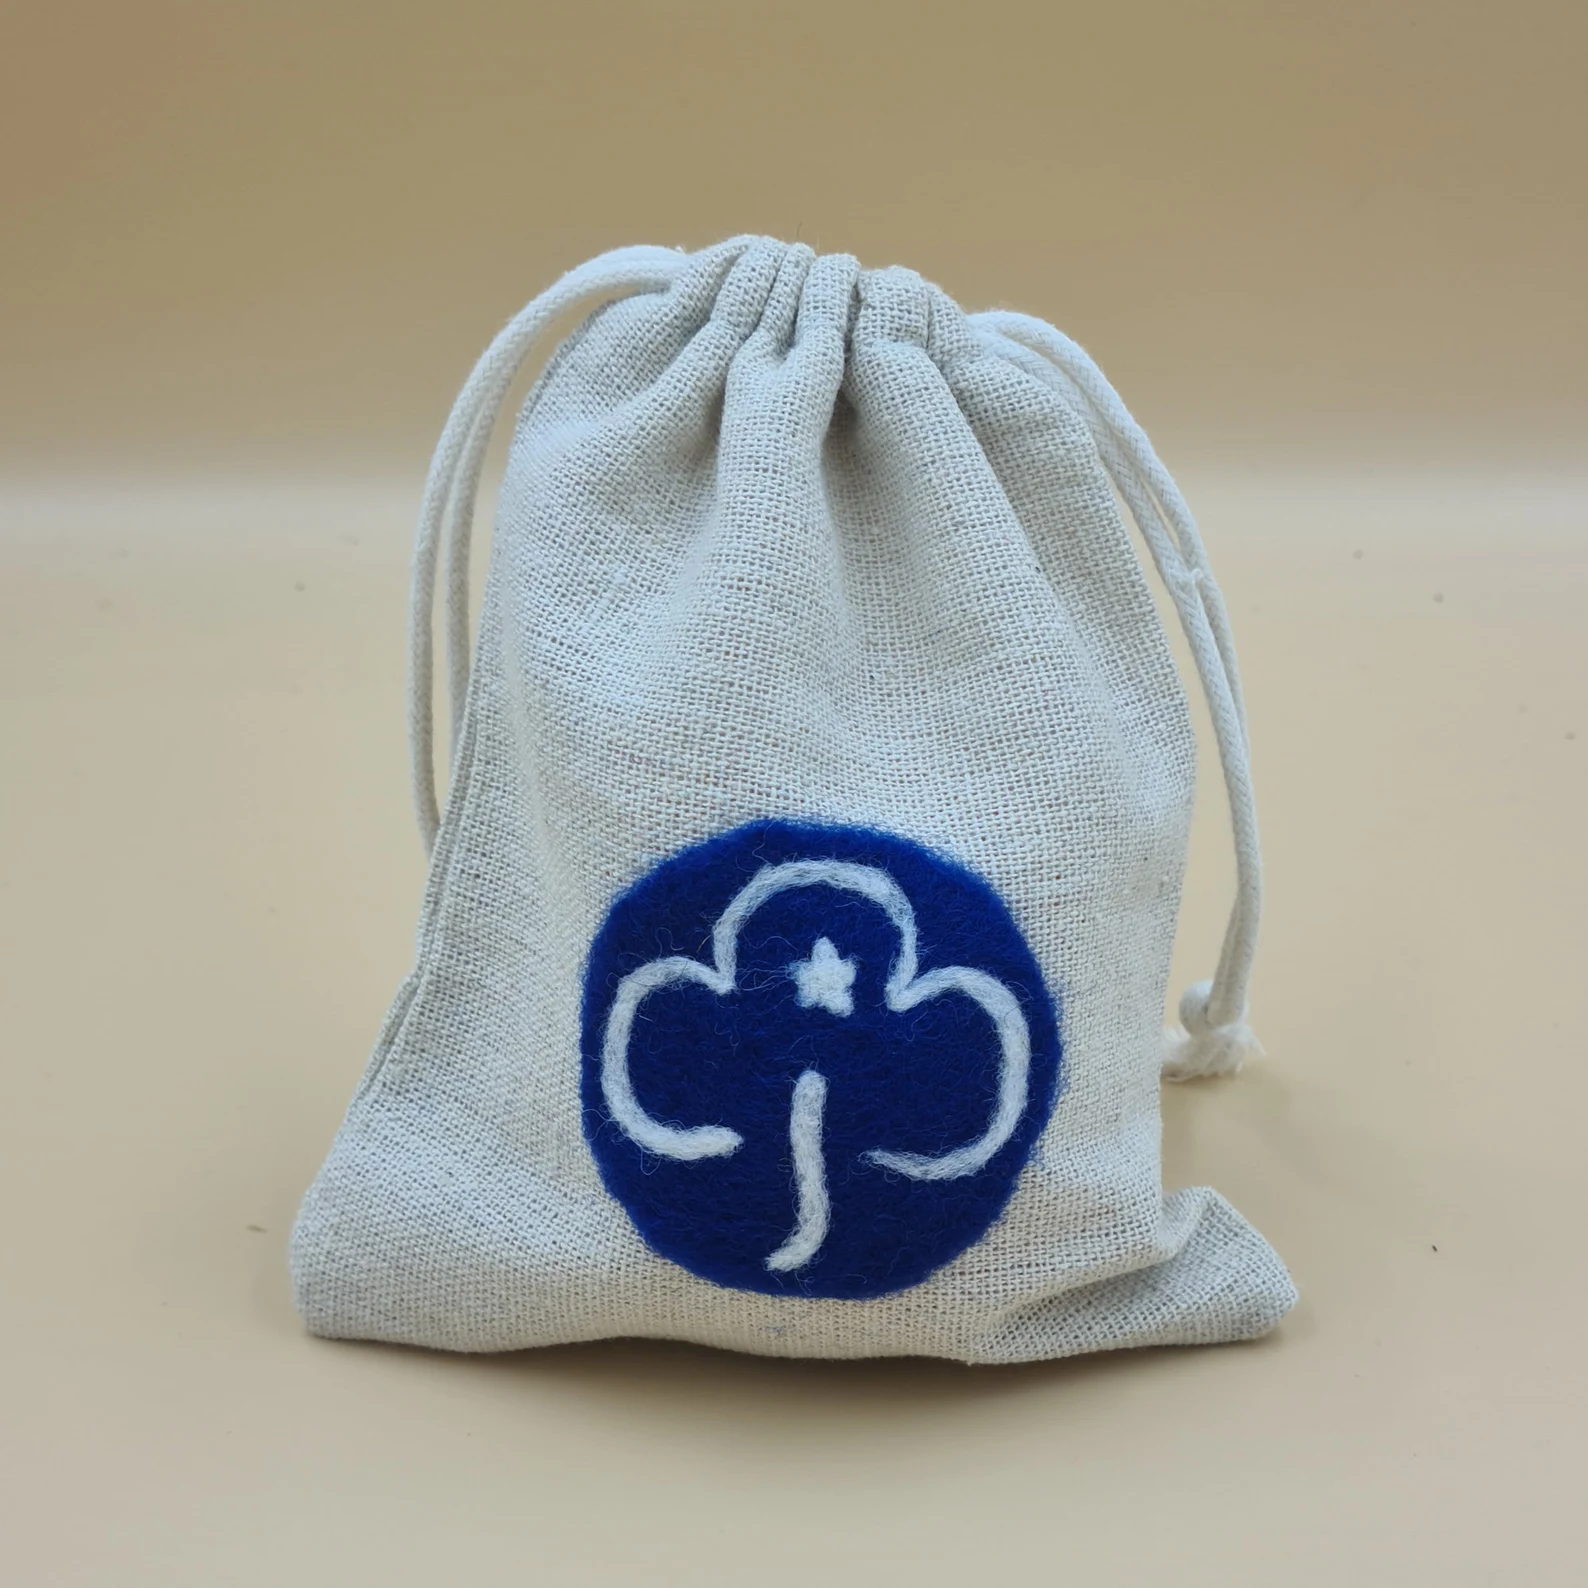 Cotton drawstring bag featuring needle felted Girlguiding Guides trefoil.